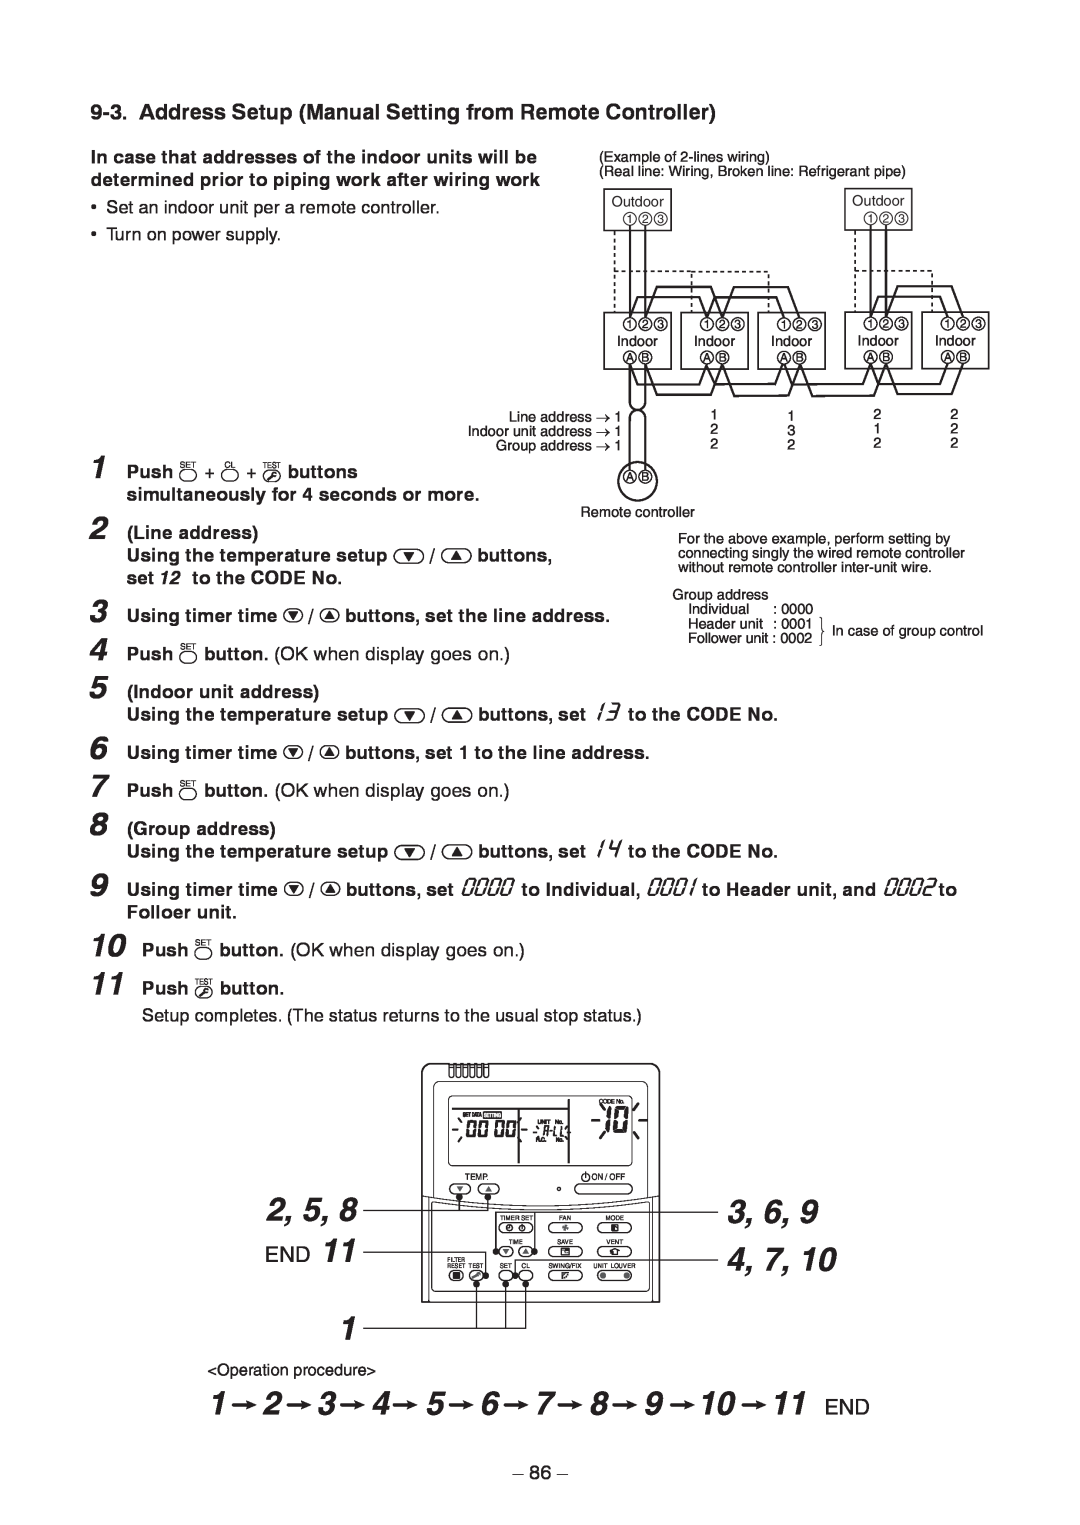 Toshiba CEILING TYPE, CONCEALED DUCK TYPE service manual 2, 5, 3, 6, 9 4, 7, 1 2 3 4 5 6 7 8 9 10 11 END 